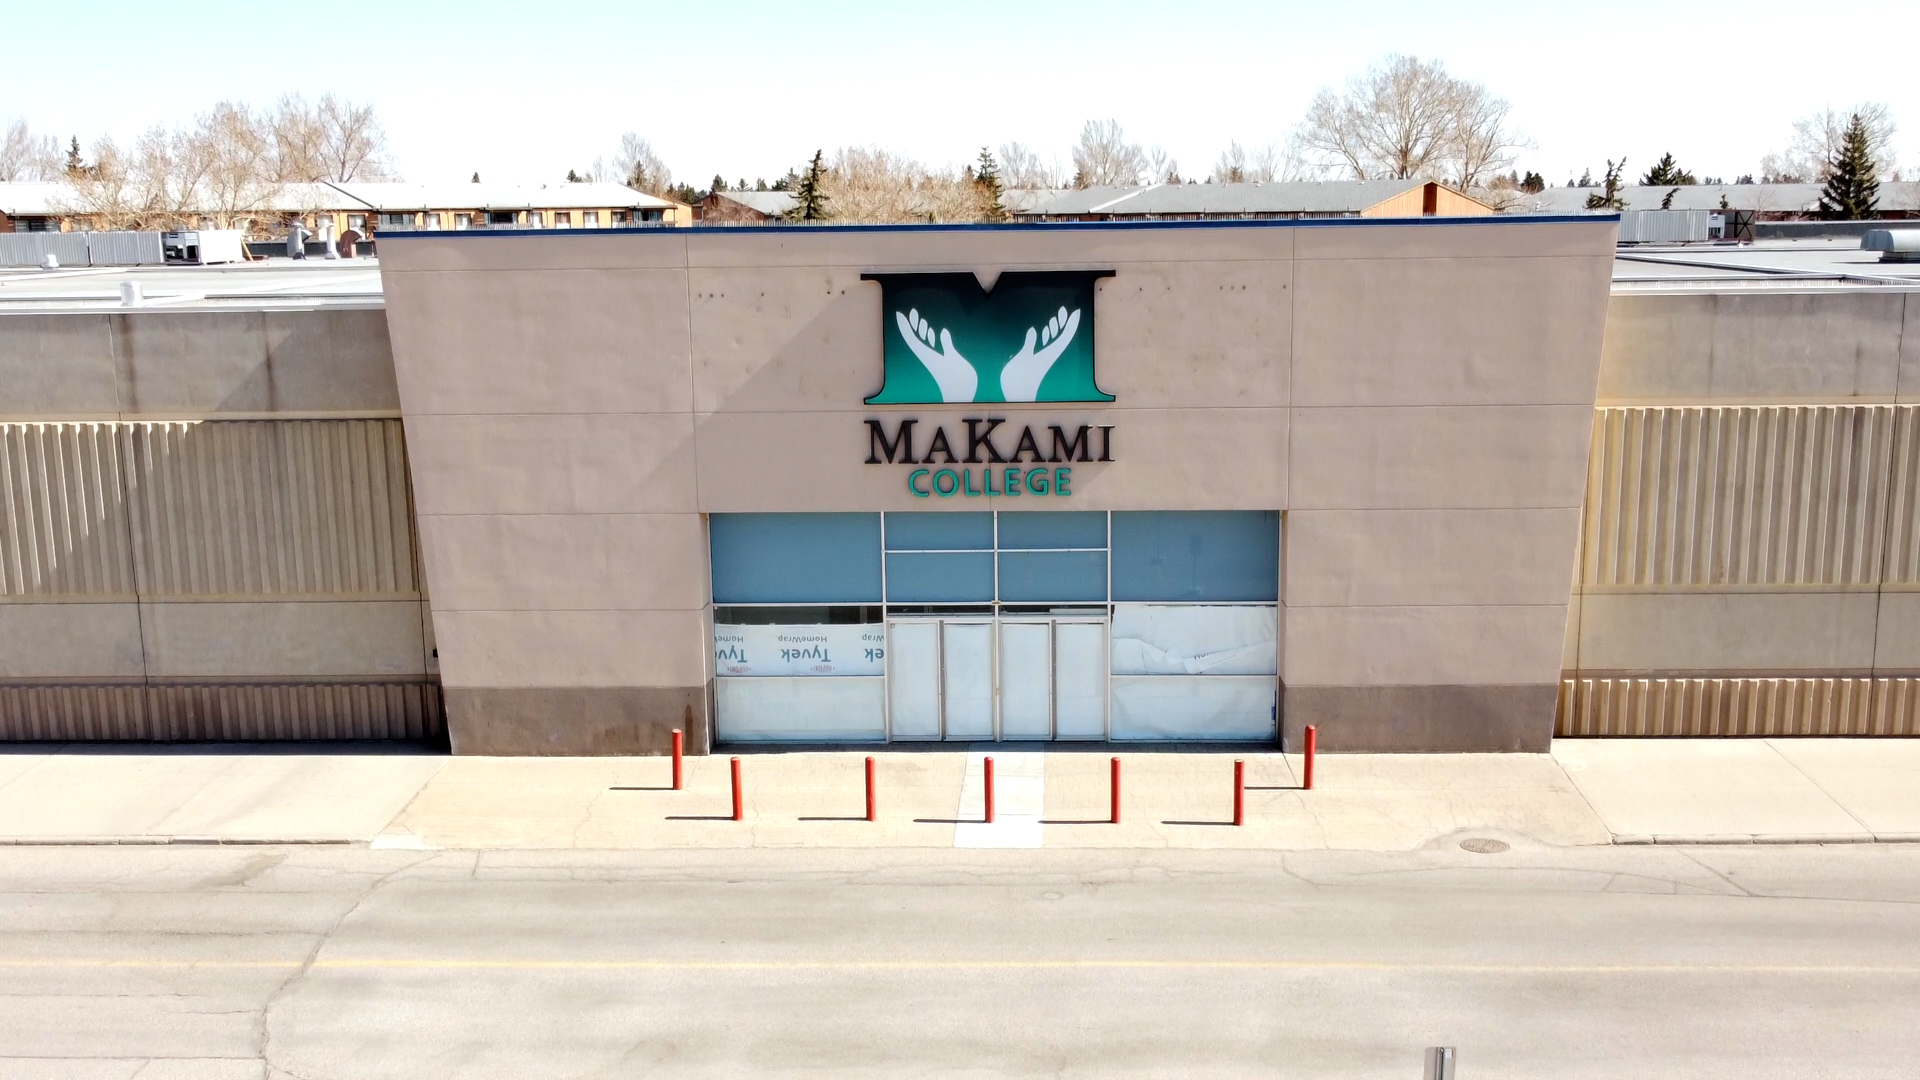 MaKami College logo sign on the exterior of a cement wall of Marlborough Mall in Calgary, Alberta, Canada